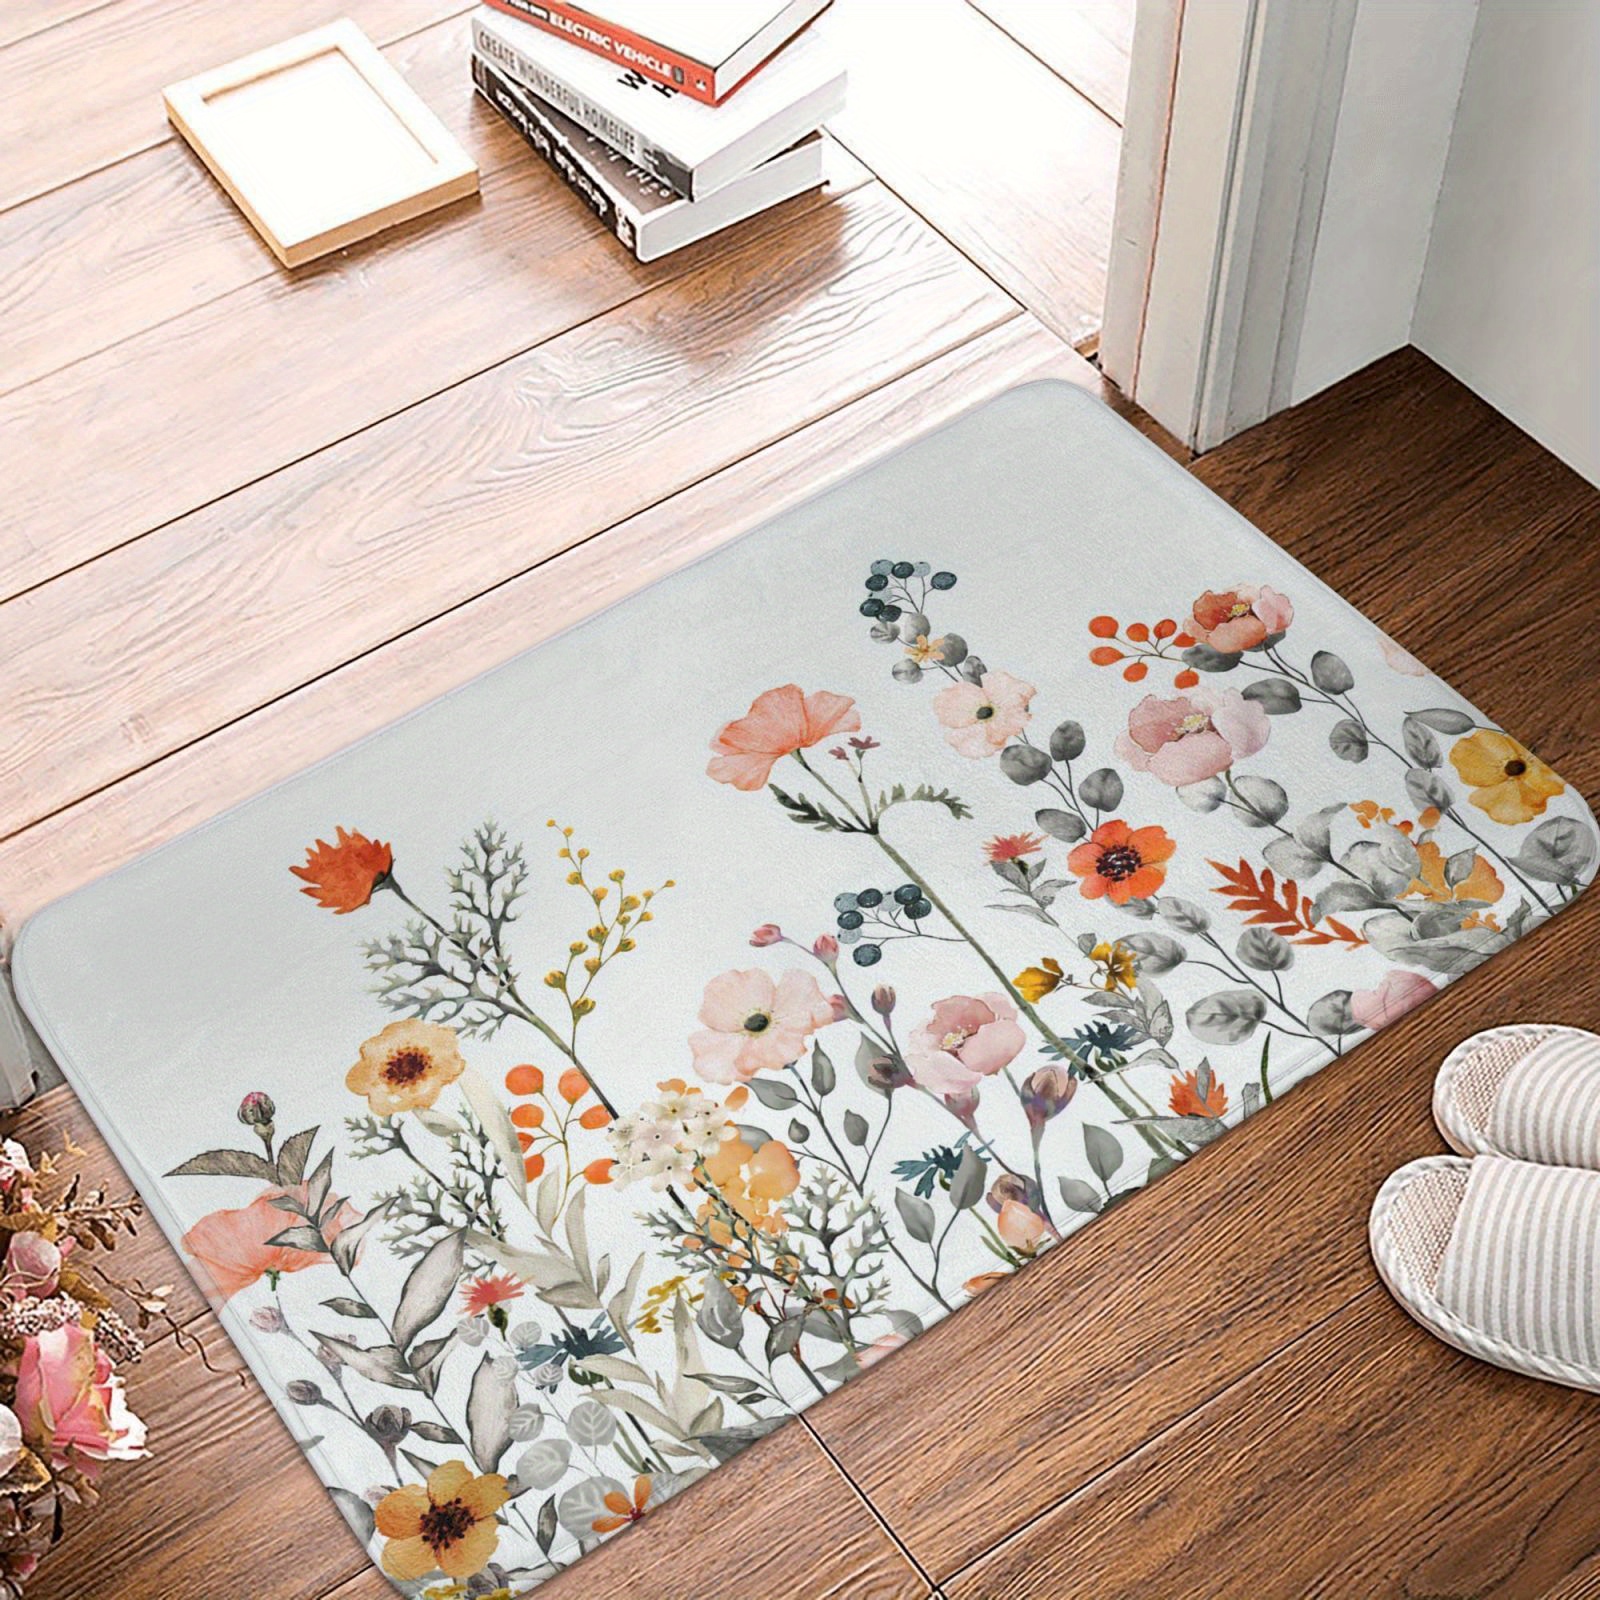 GIBZ Vintage Kitchen Floor Rug Anti Fatigue Extra Large Soft Floral Mat  Washable Leather Pad with Non Slip Backing, 47×70